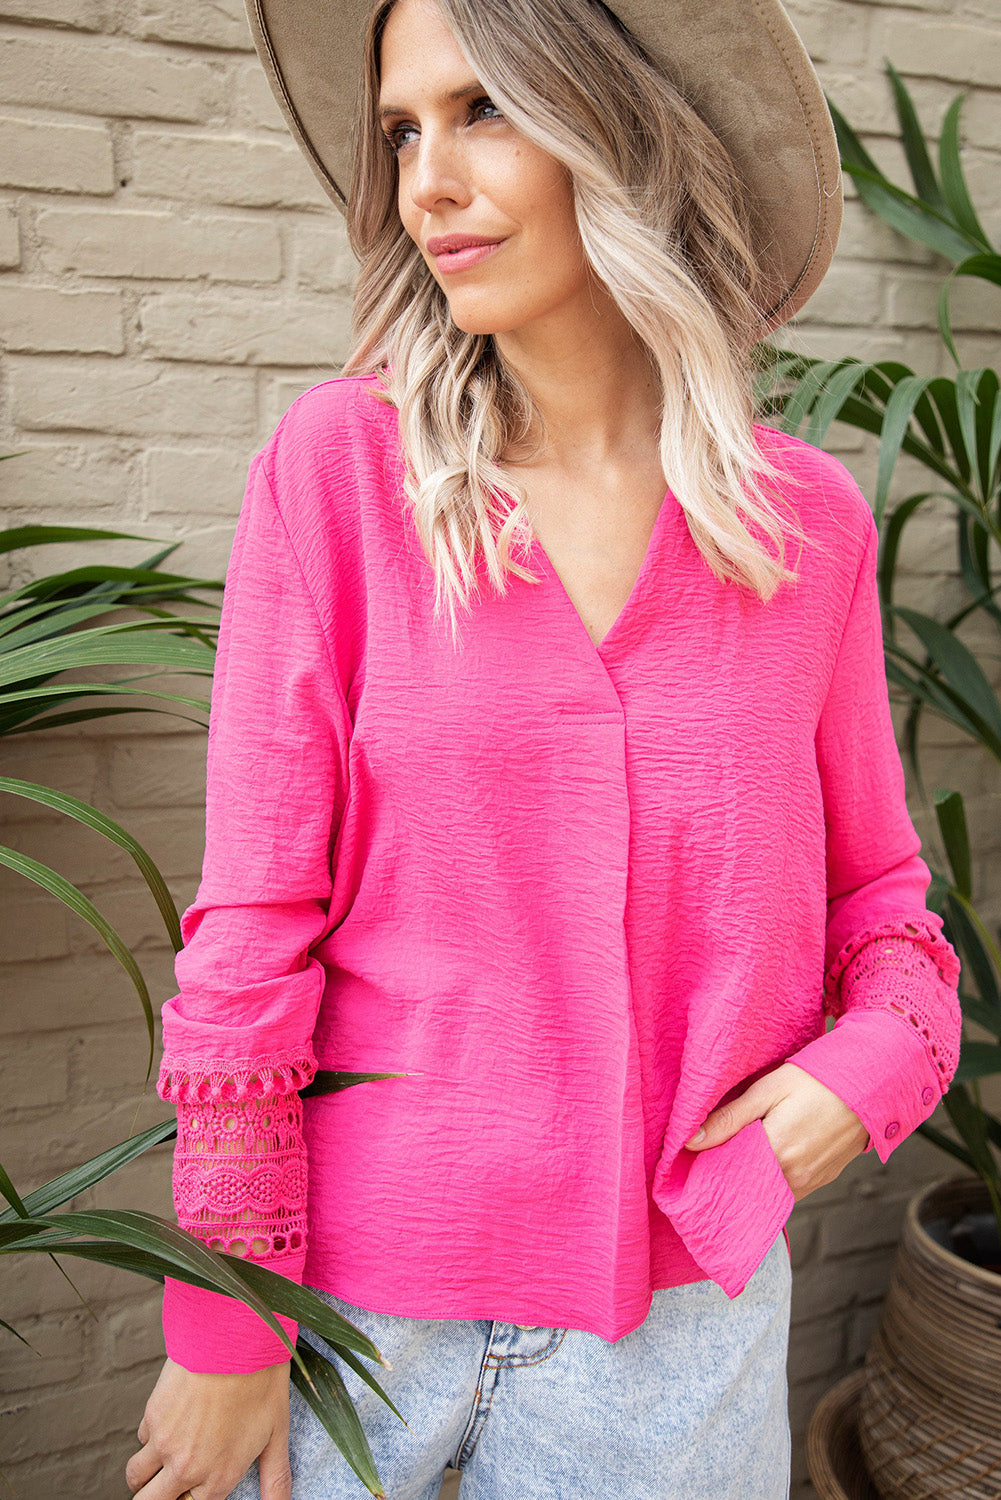 Rose Lace Crochet Textured V Neck Top